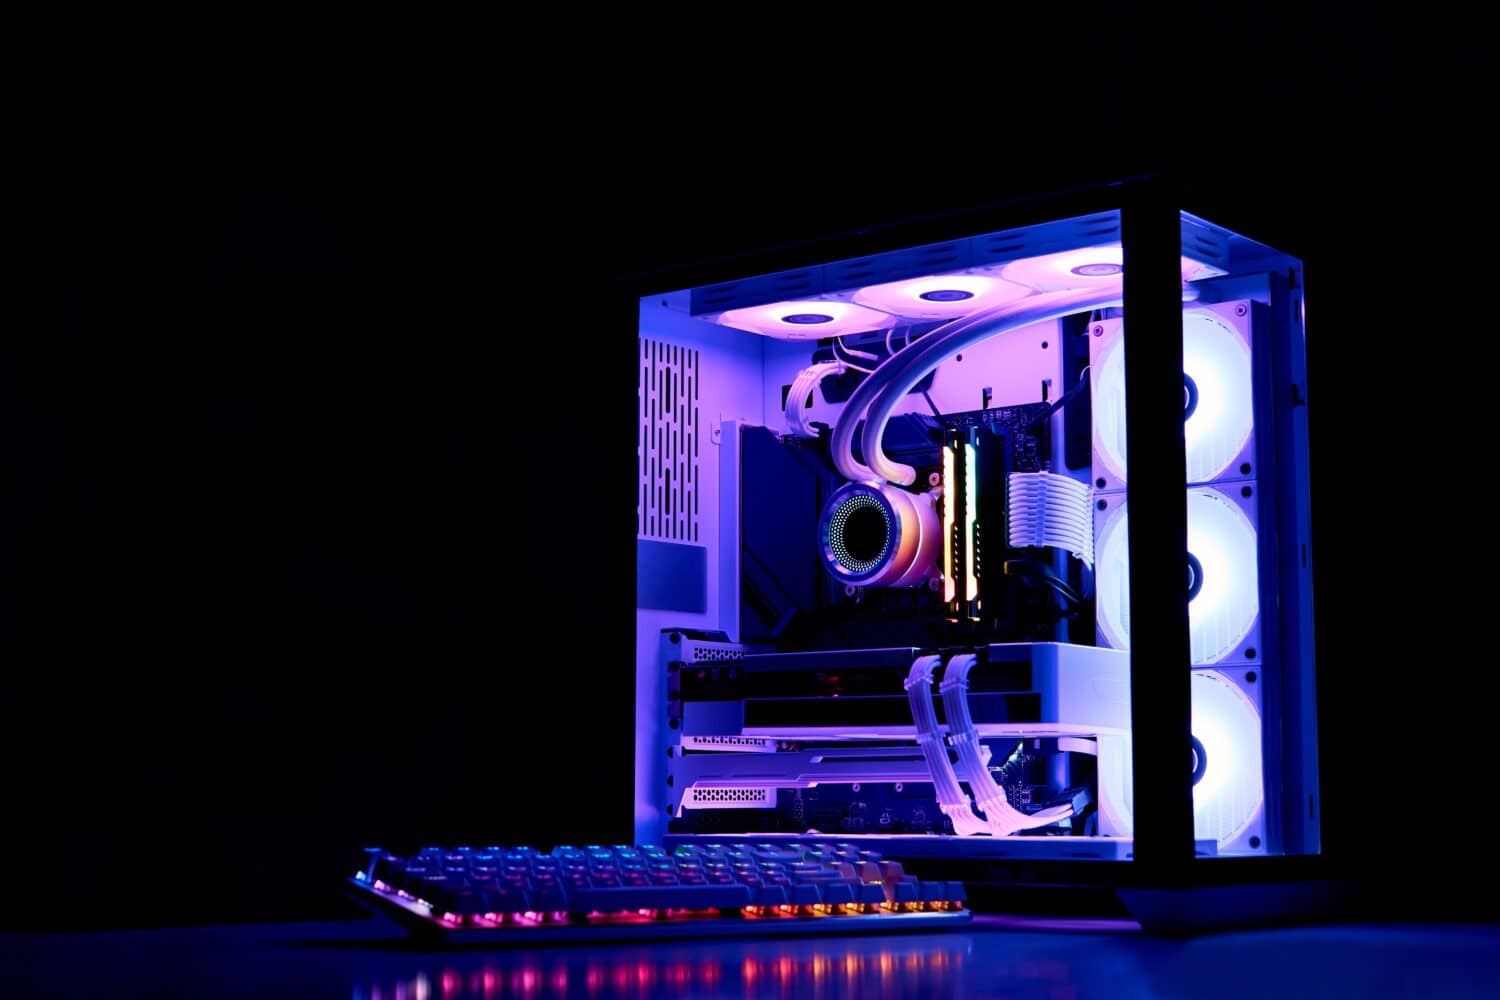 6 Best PC Cases for Water Cooling in 2024, pc, game, tower, gamer, case, computer, desktop, cooling, keyboard, custom, liquid, fan, cpu, system, desk, components, dark, neon, water, light, white, rainbow, glass, colorful, modern, night, gear, electronic, cyberspace, device, motherboard, equipment, processor, workplace, backlight, gaming, led, esport, gpu, professional, cooler, bright, colourful, cooled, cyber, desktop pc, illuminated, multicolored, powerful, rgb